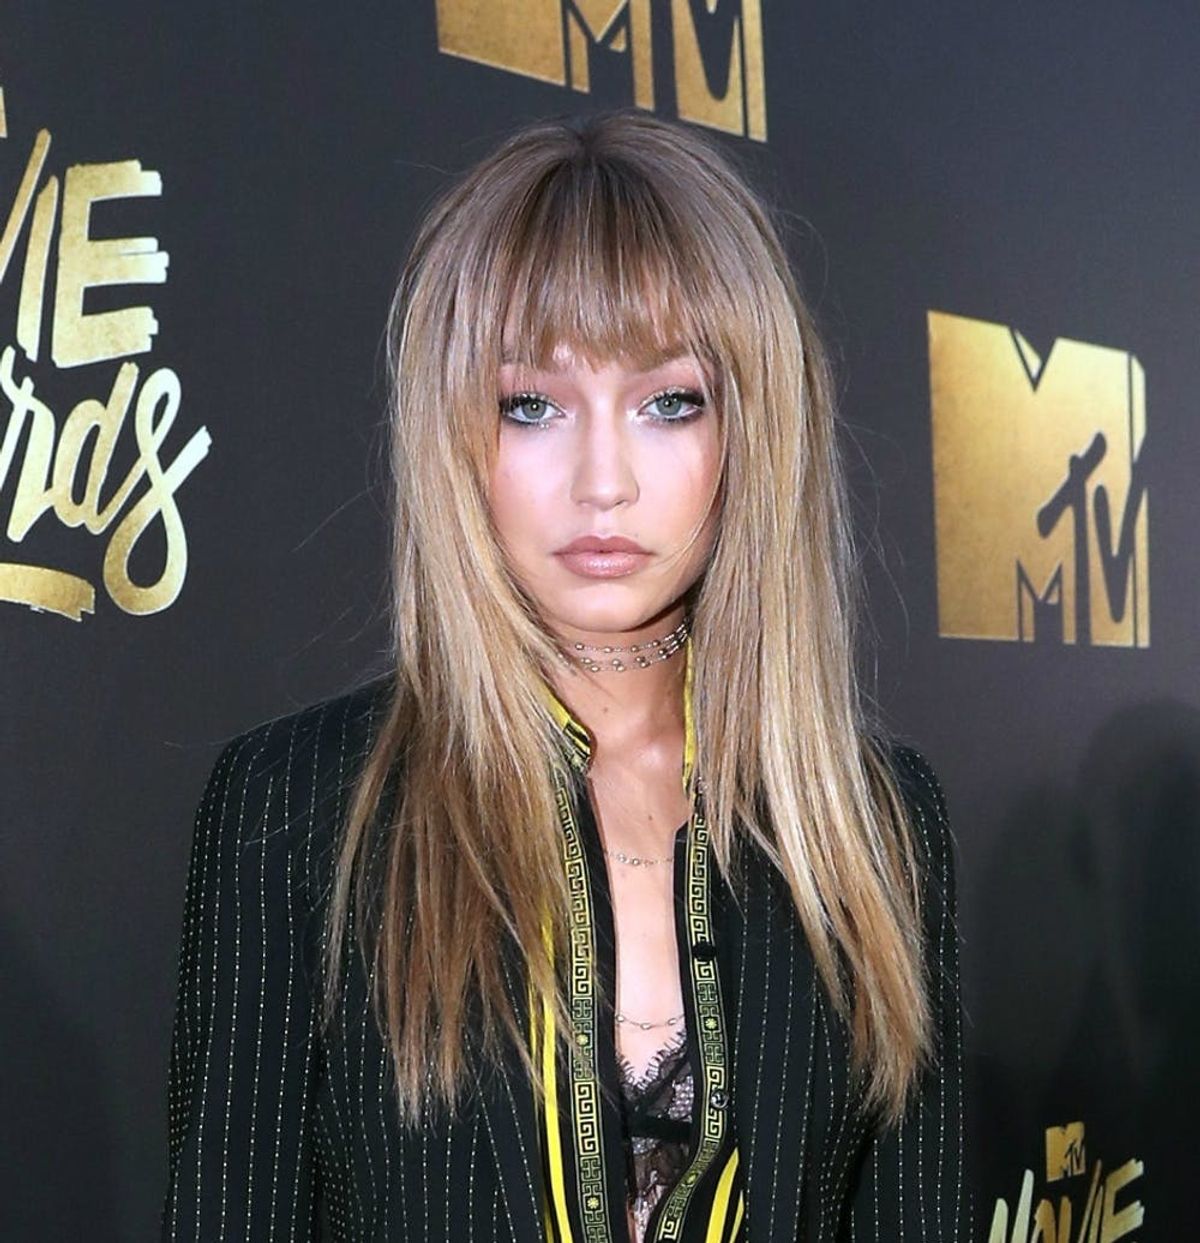 Gigi Hadid Just Debuted New Bangs — But Are They Real?!